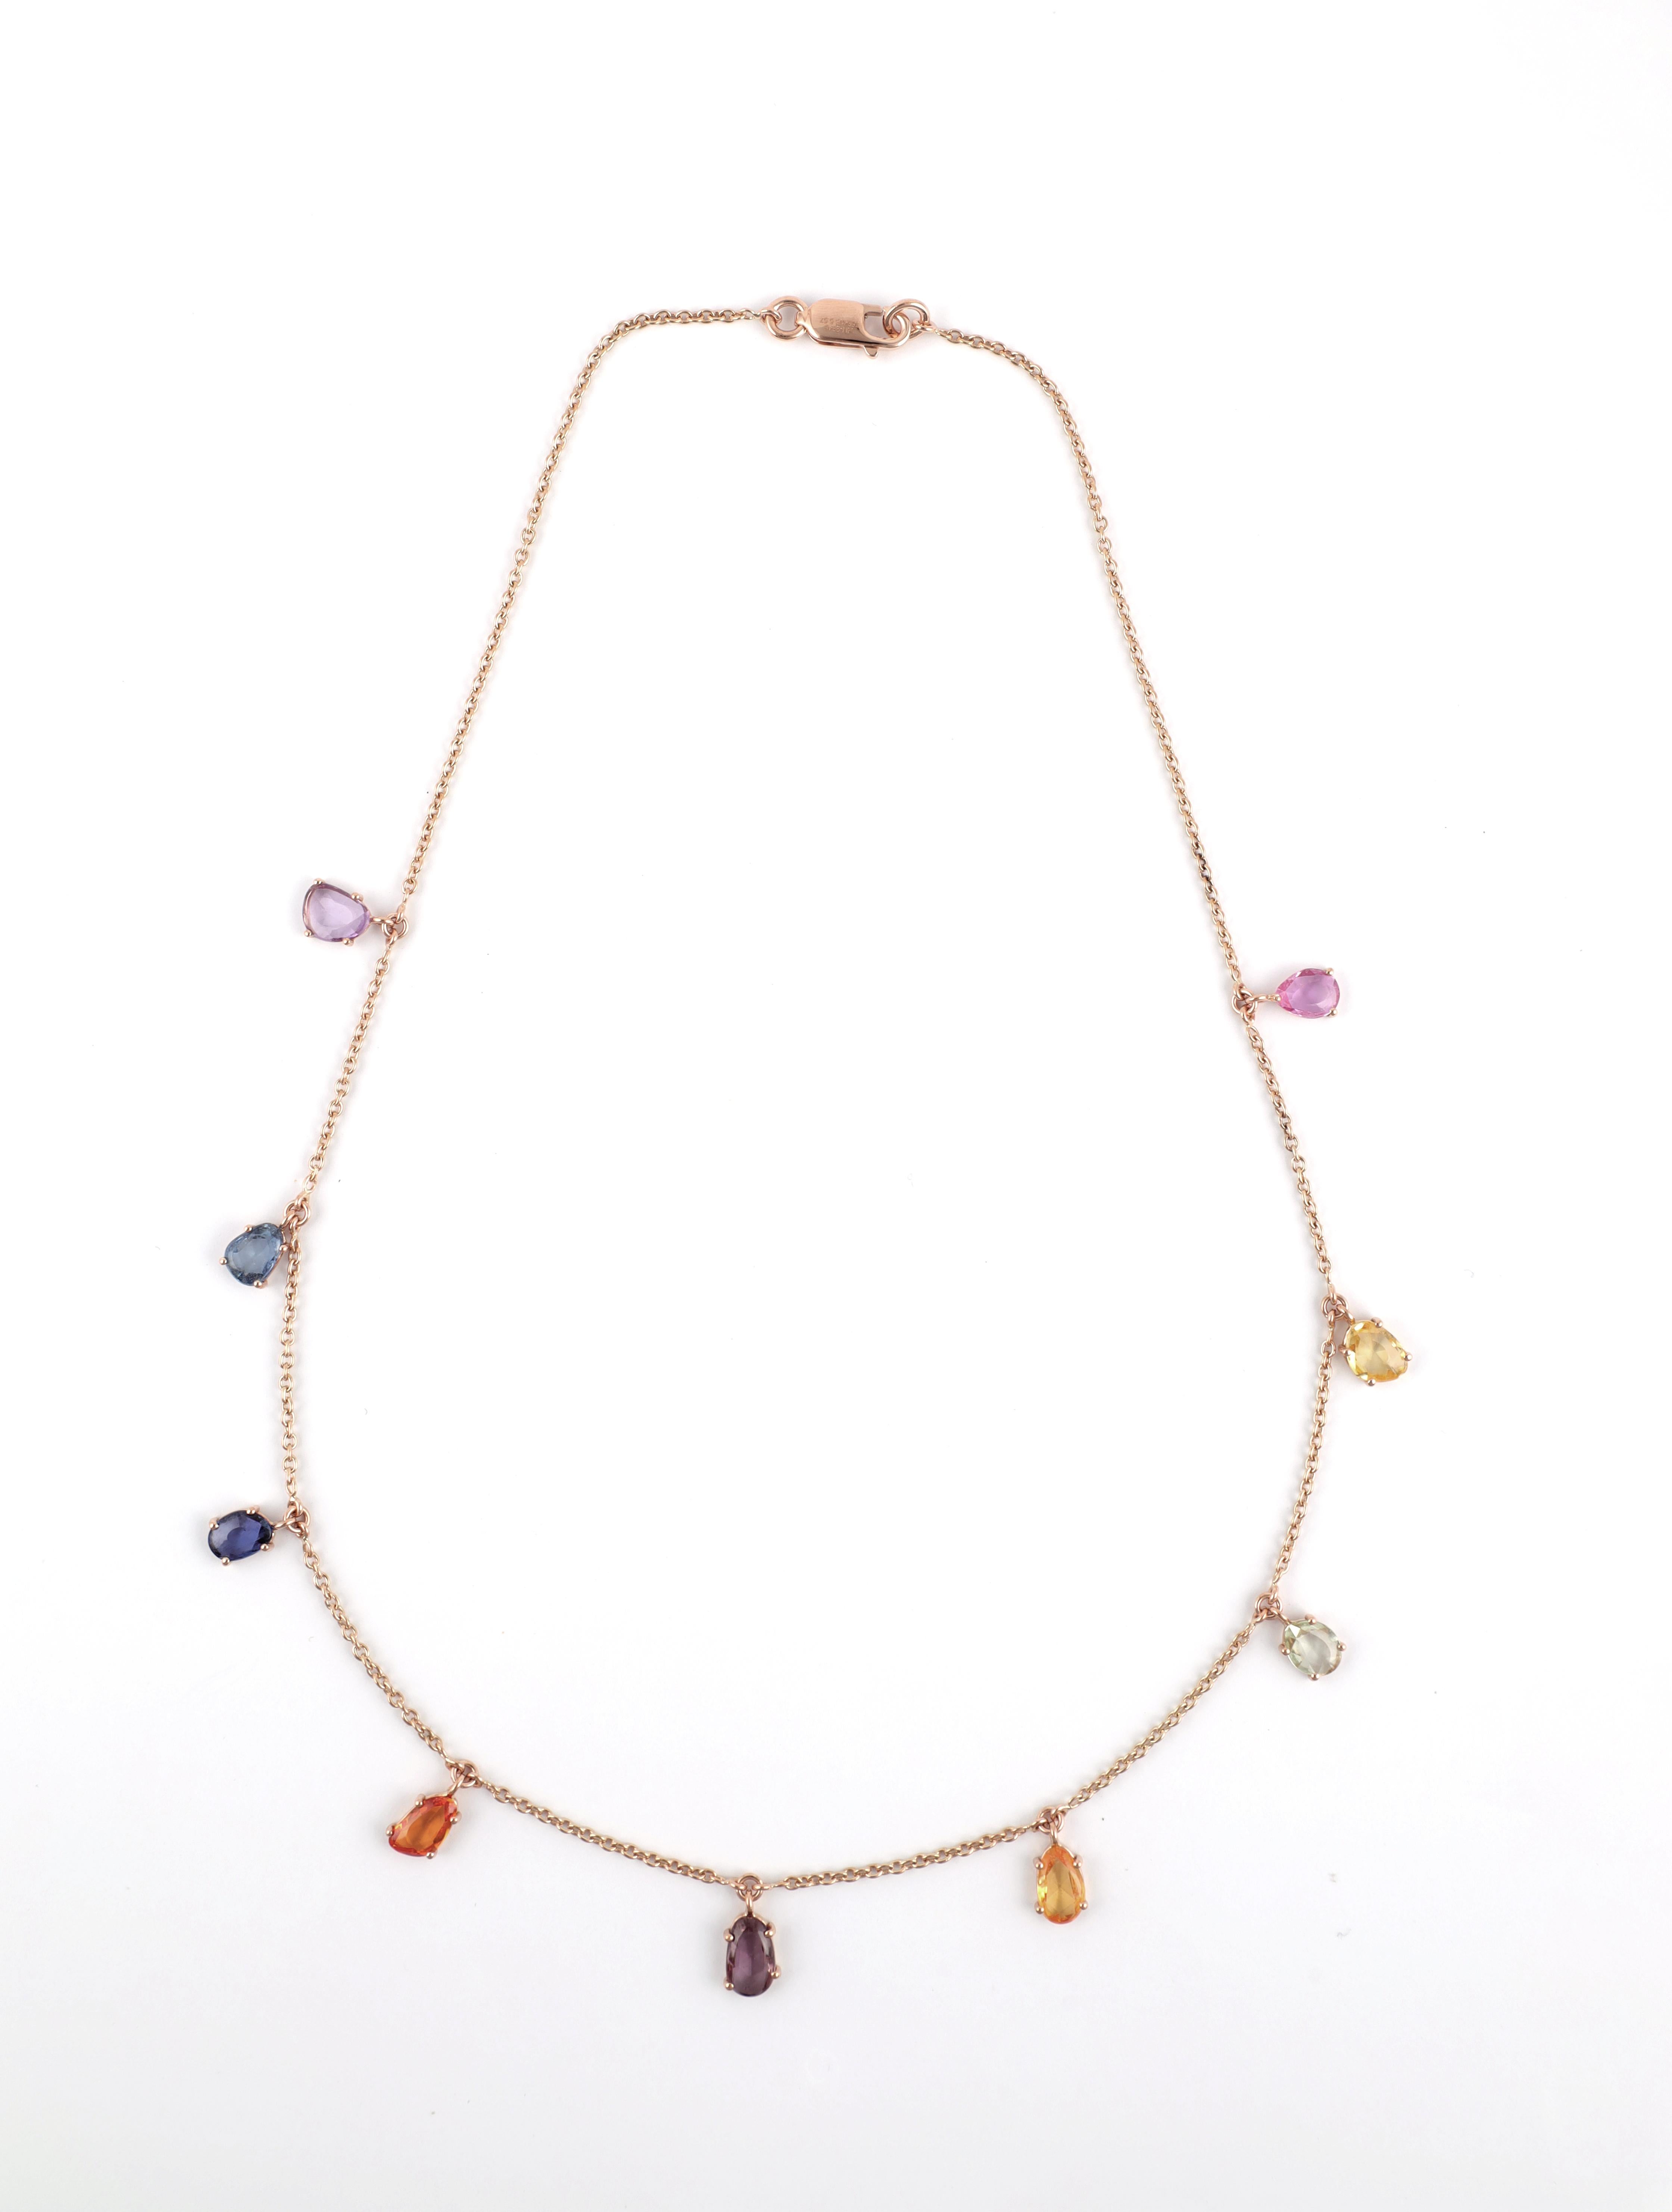 Multi-Colors Rainbow Sapphire  Chain Necklace in 18K Rose Gold studded with mix cut sapphire pieces.
Accessorize your look with this elegant Blue sapphire chain necklace. This stunning piece of jewelry instantly elevates a casual look or dressy